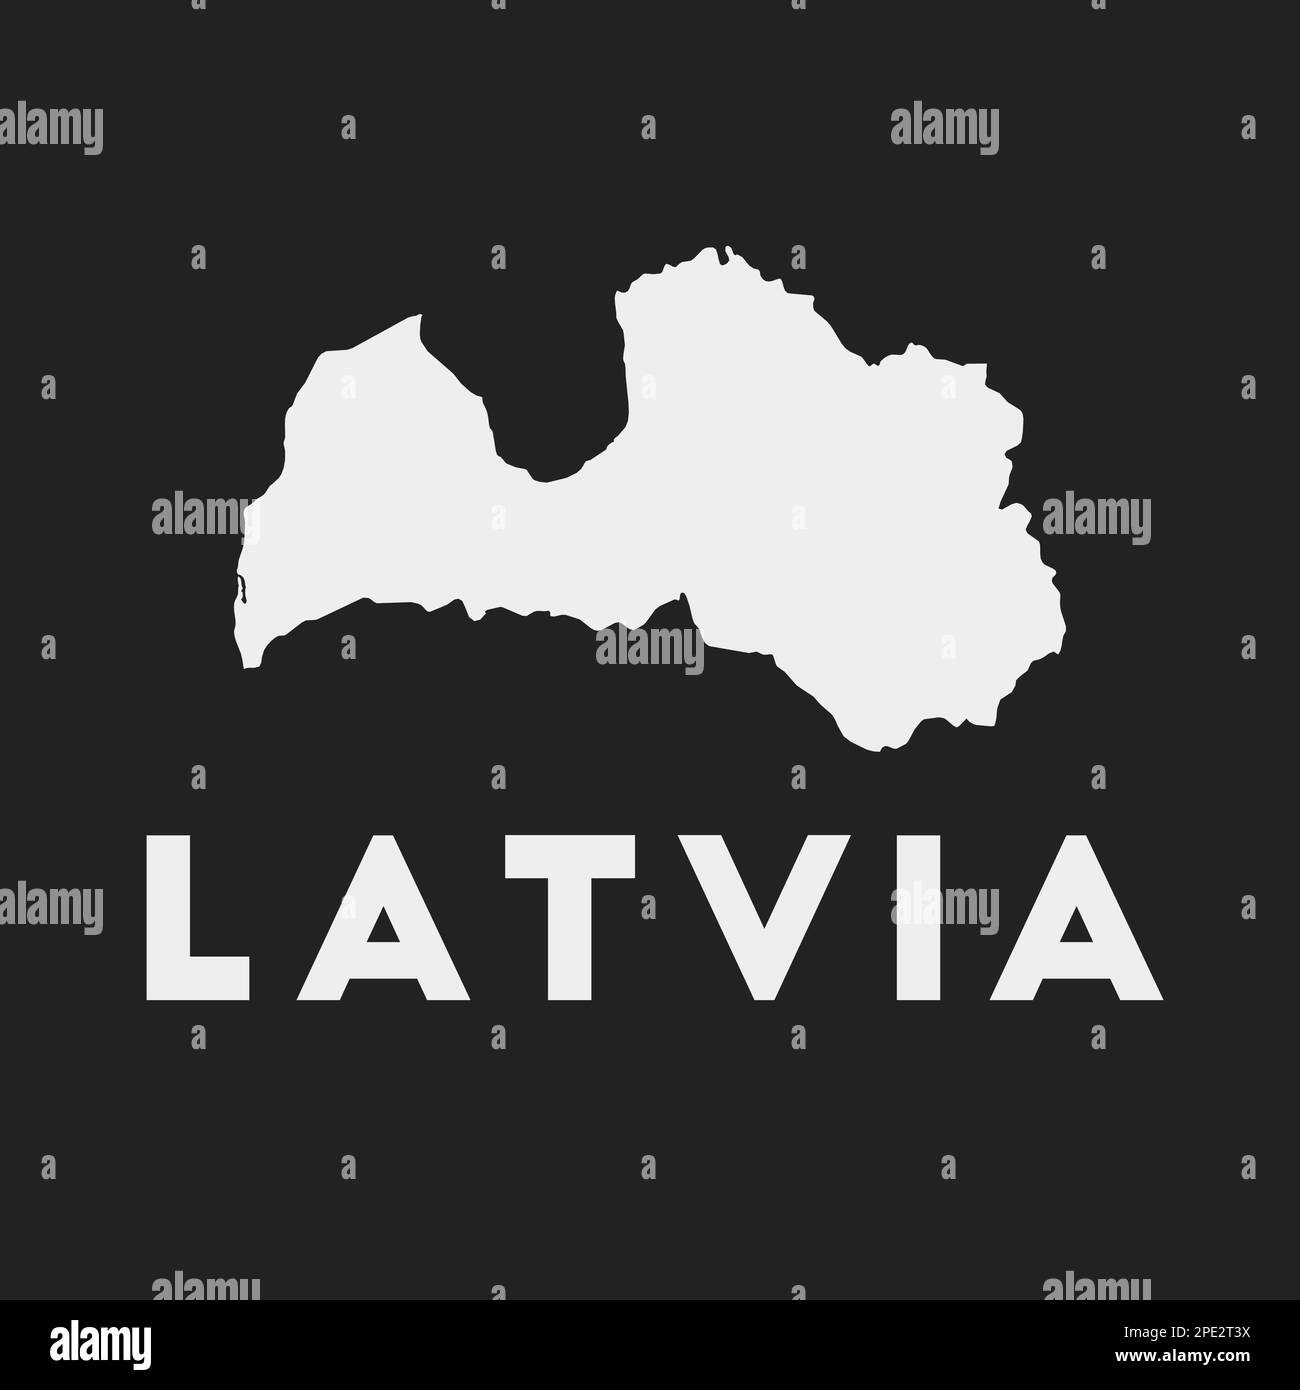 Latvia icon. Country map on dark background. Stylish Latvia map with country name. Vector illustration. Stock Vector